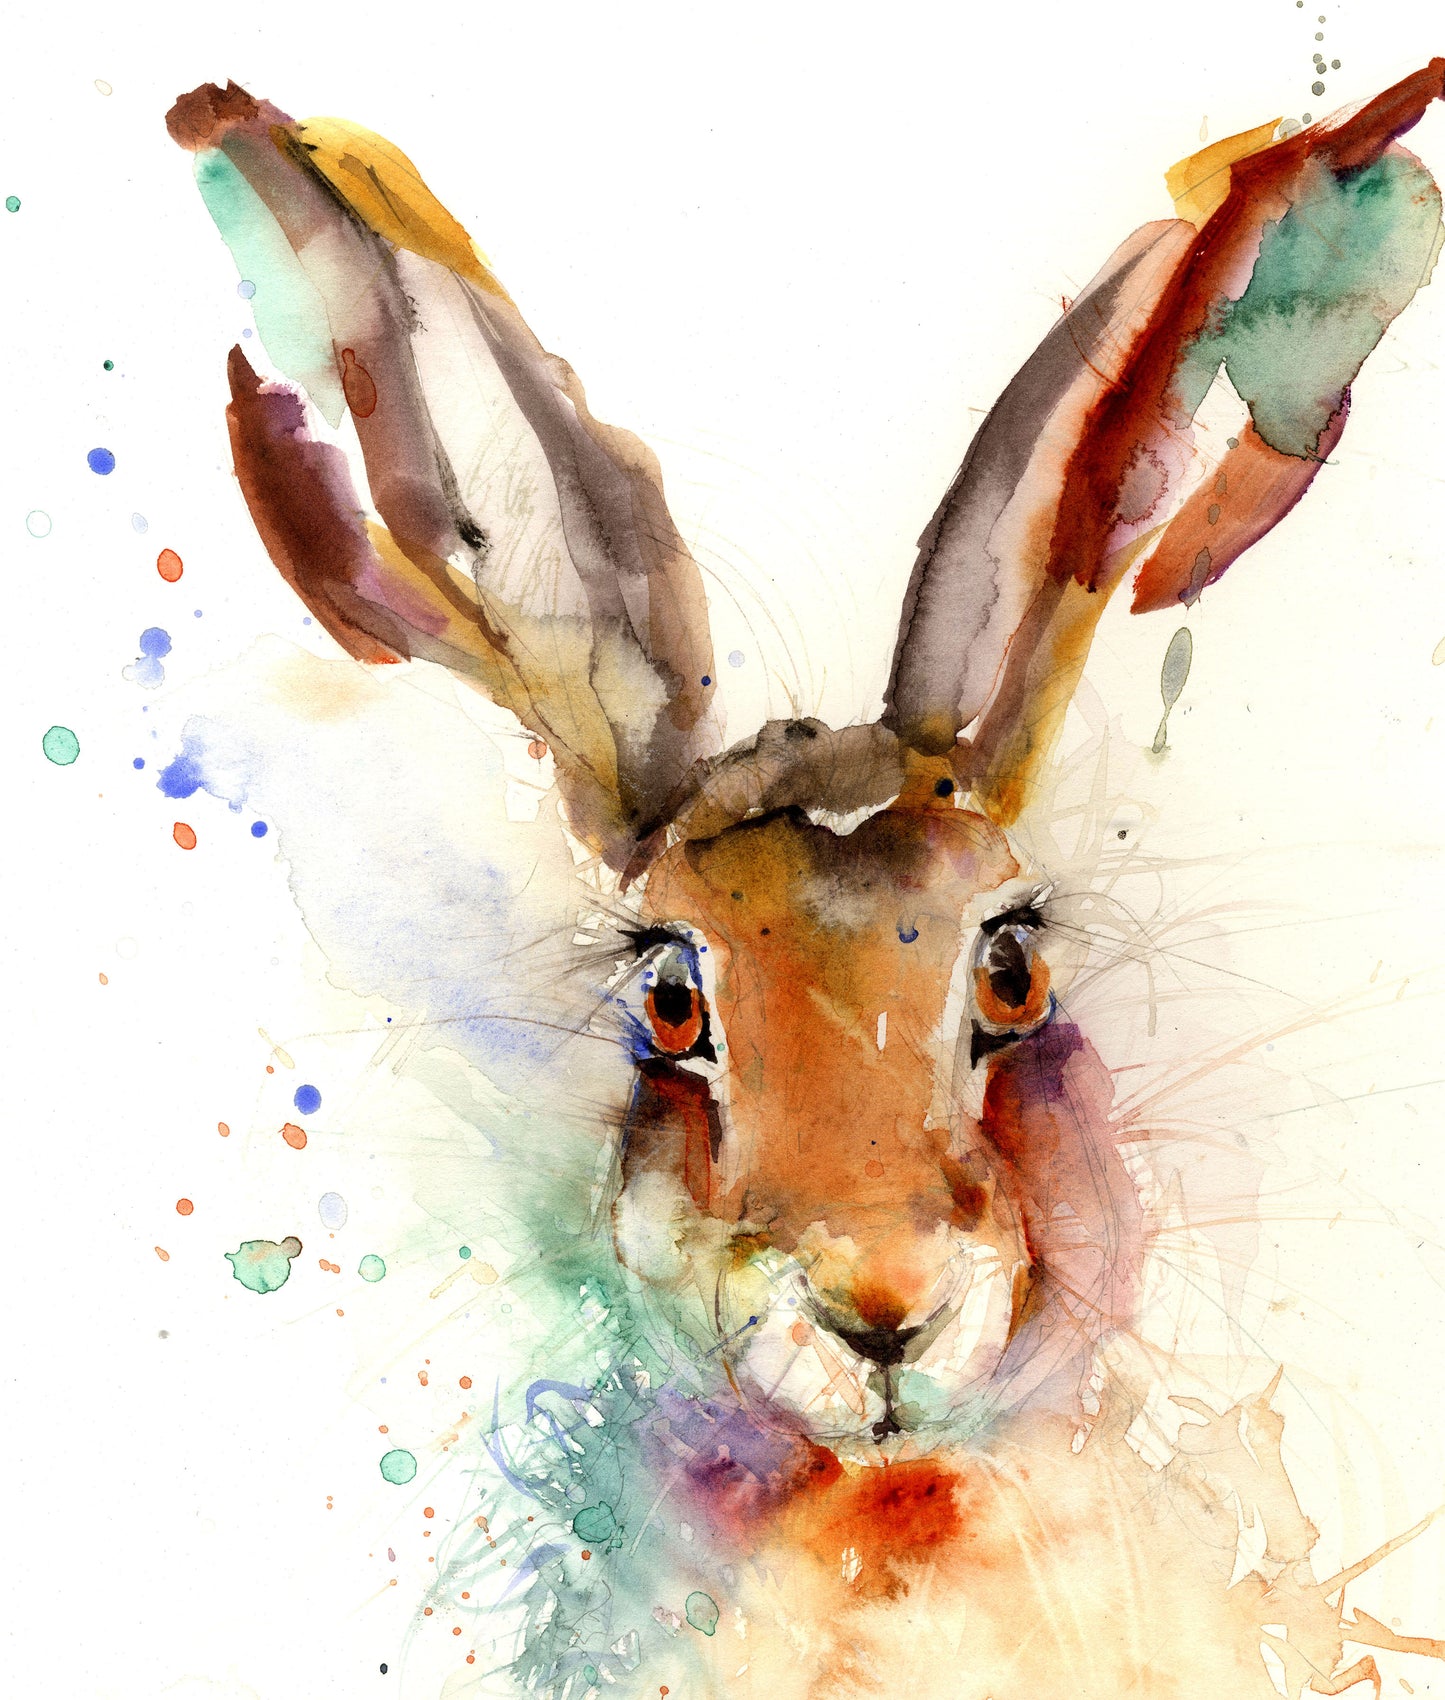 Limited edition hare print - Jen Buckley Art limited edition animal art prints